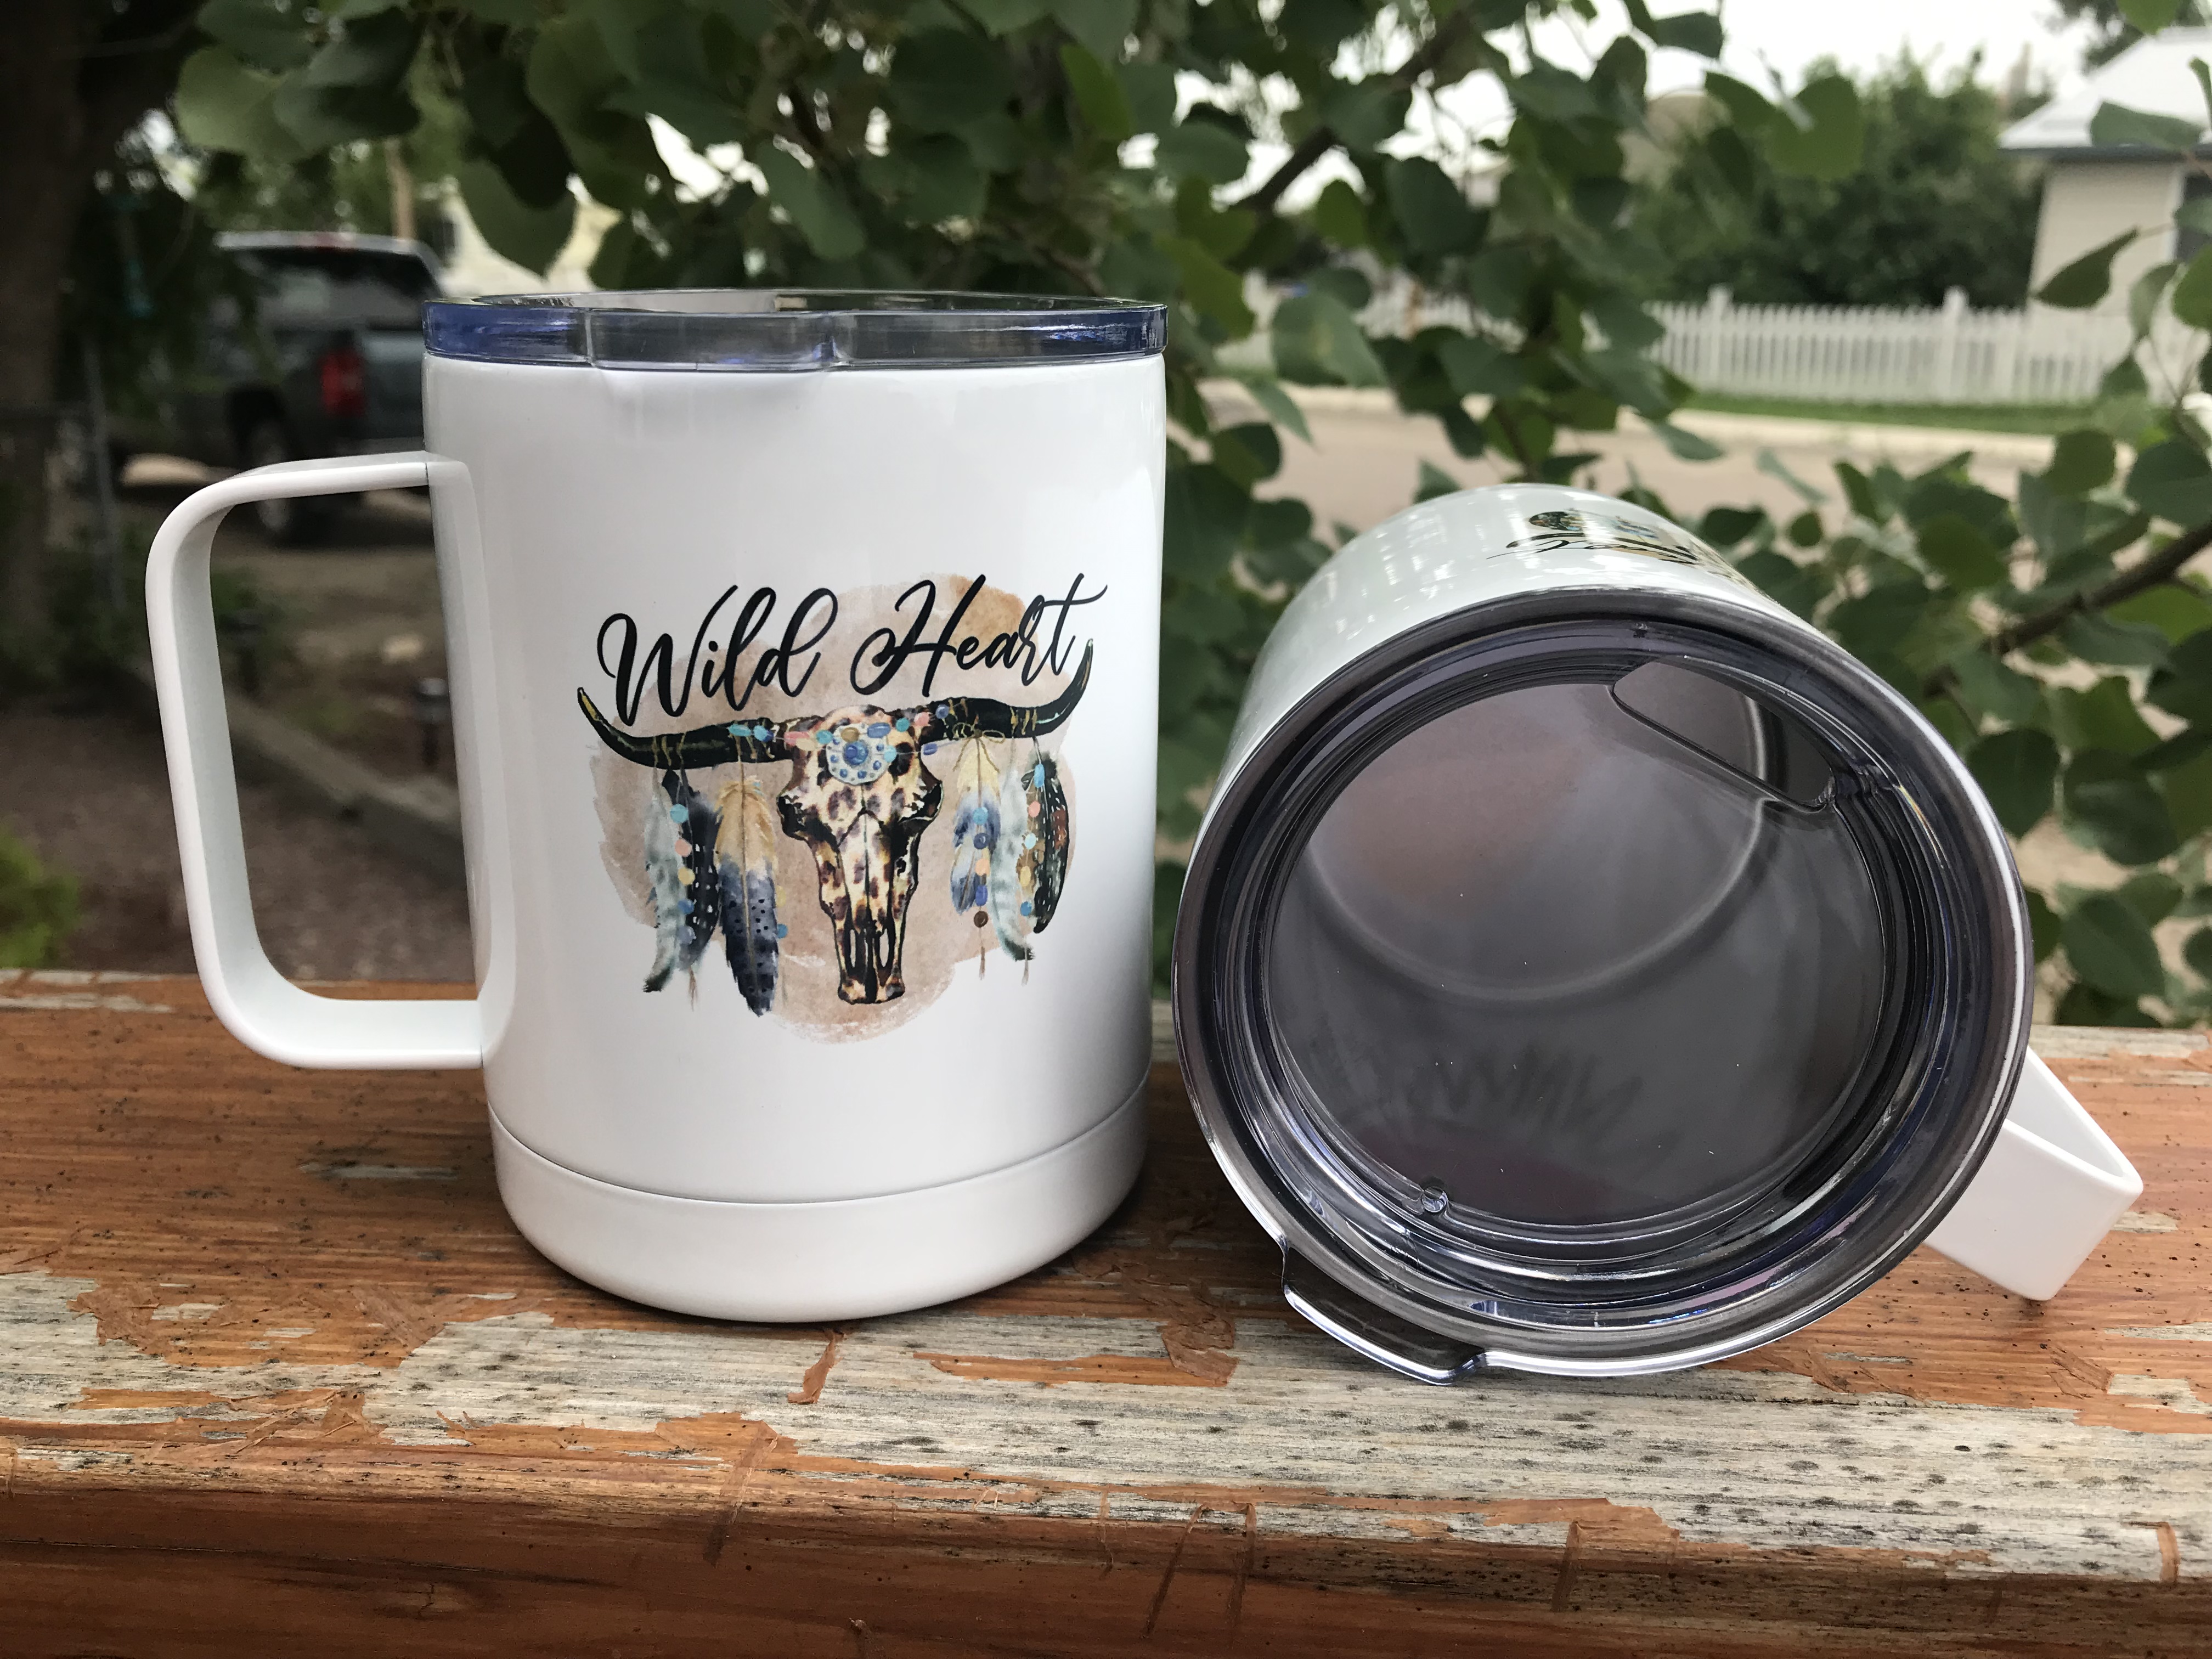 Wild Heart Stainless Steel 15 oz mug made with sublimation printing